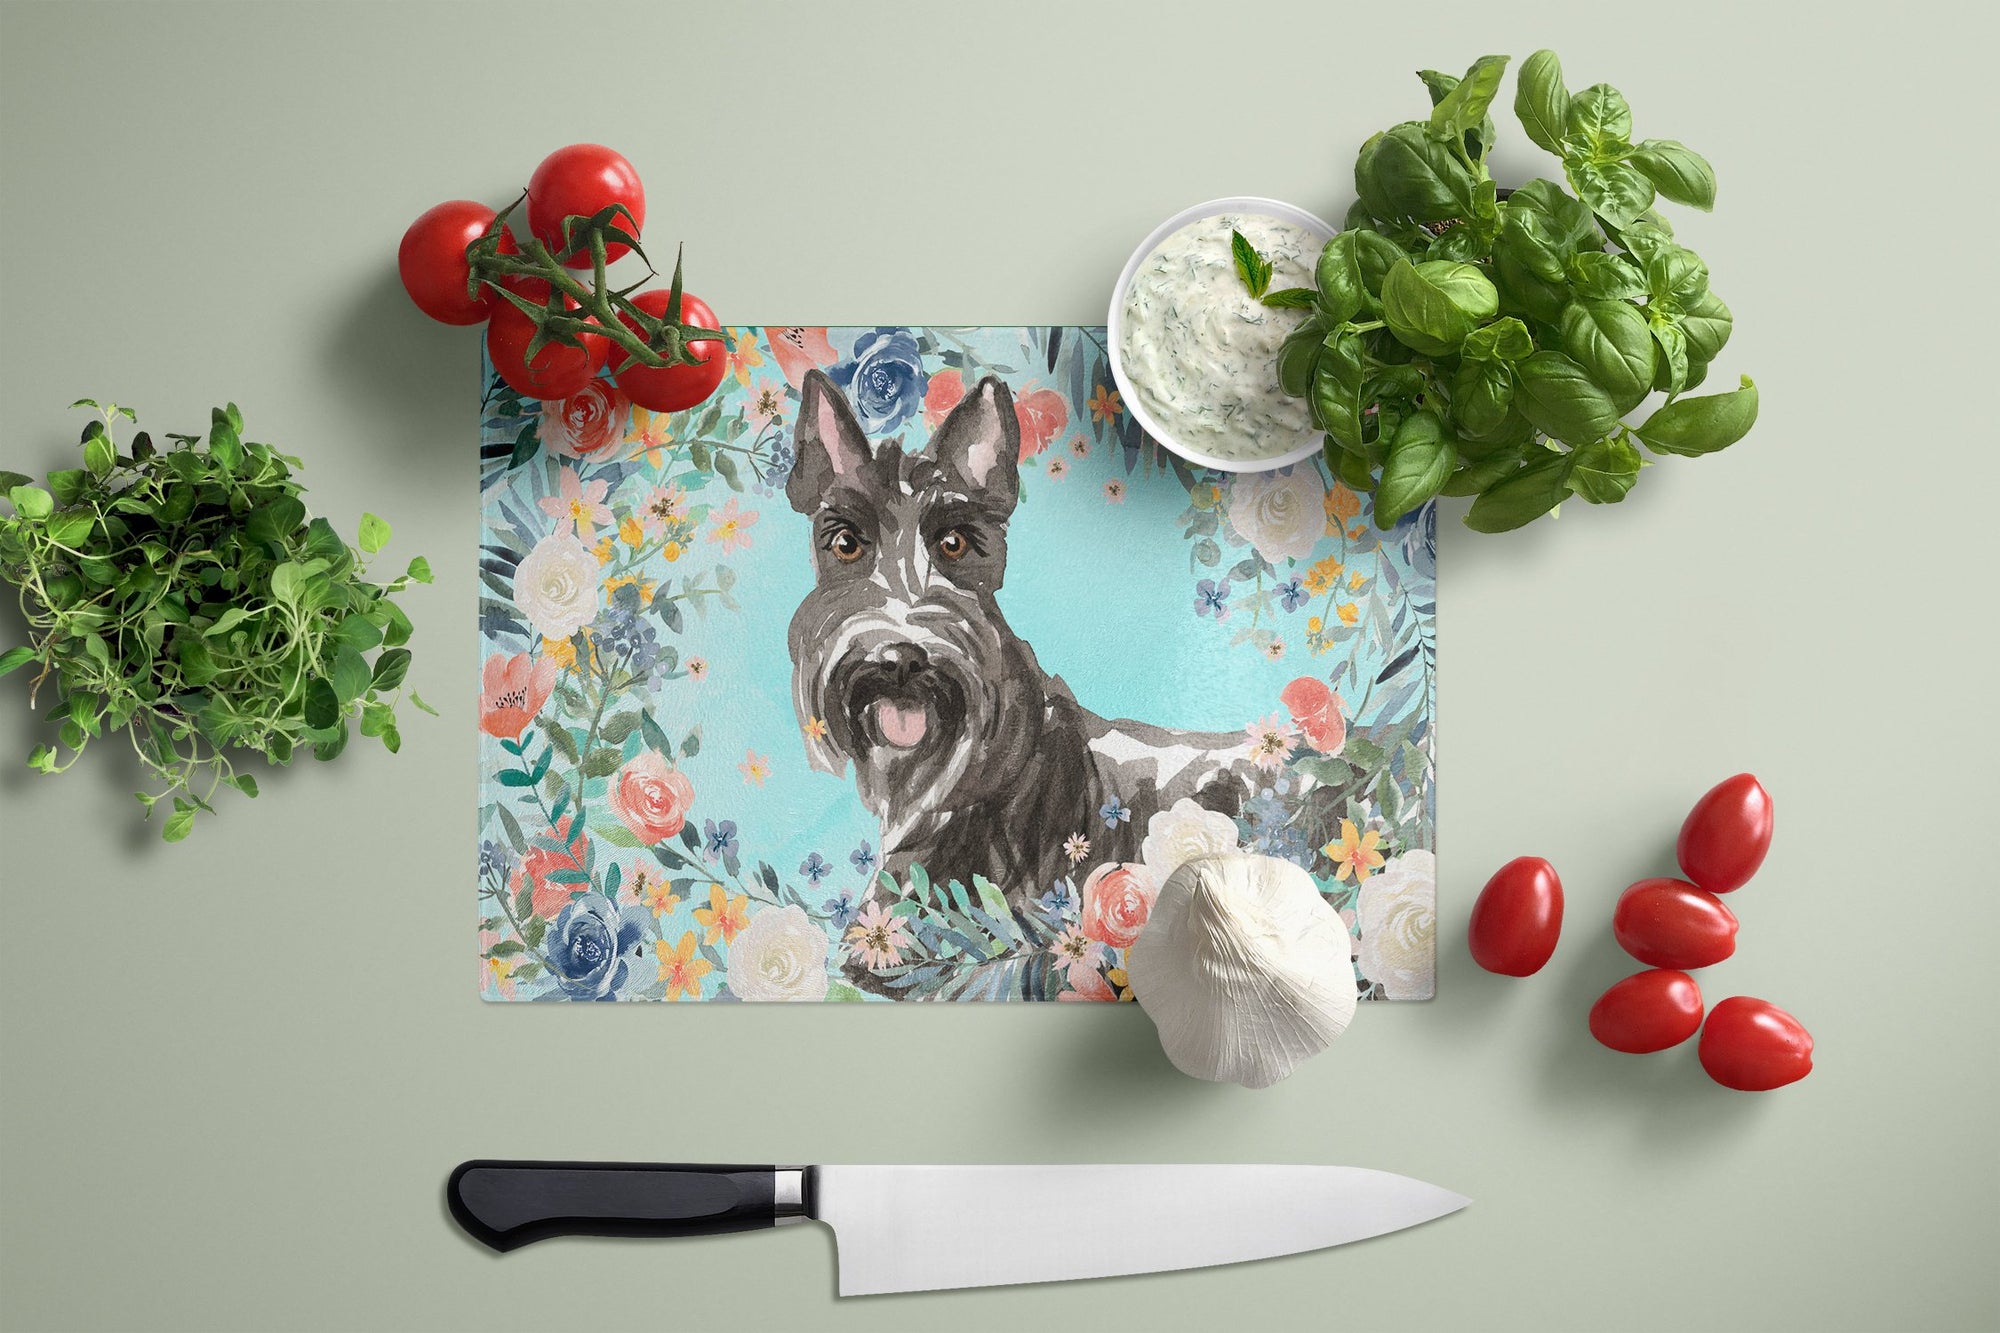 Scottish Terrier Glass Cutting Board Large CK3412LCB by Caroline's Treasures